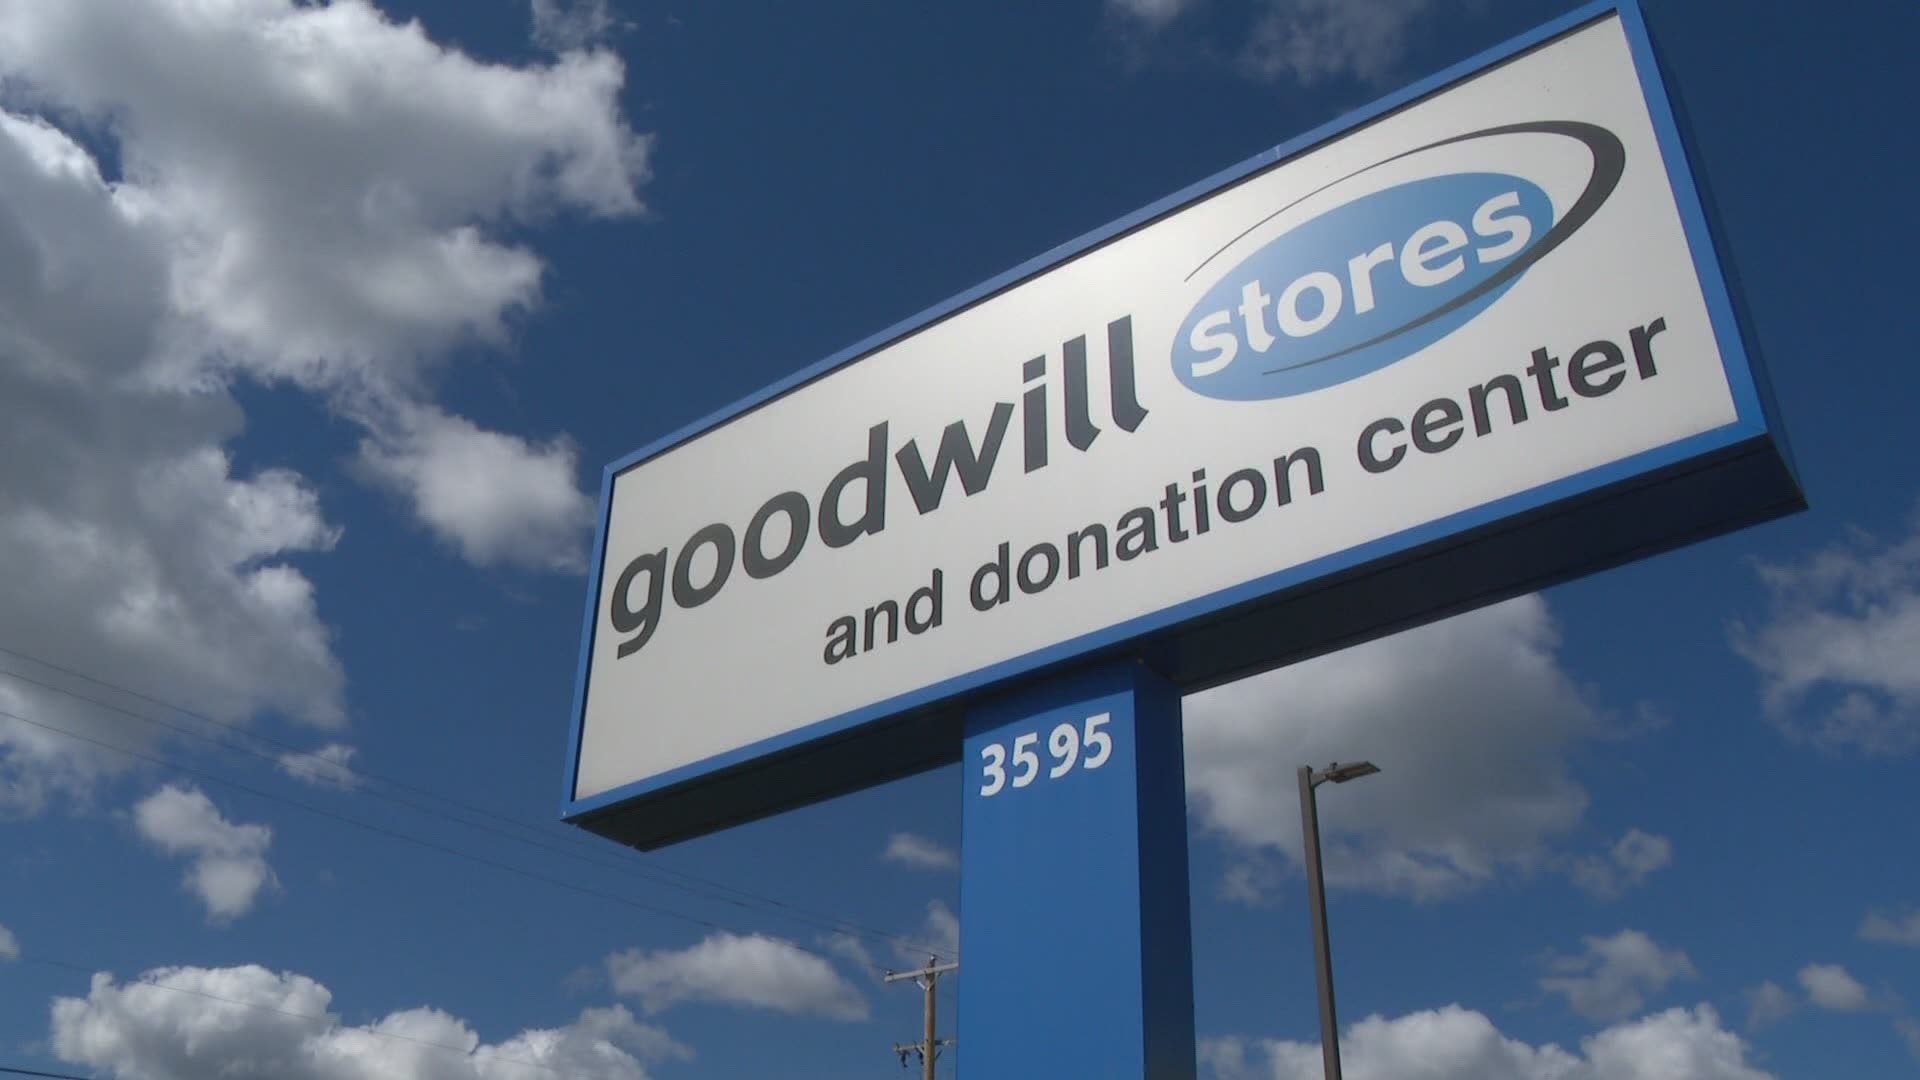 Workers at the Goodwill store in Cedar Springs recently found two urns while sifting through donations bins. Each urn has cremains inside.